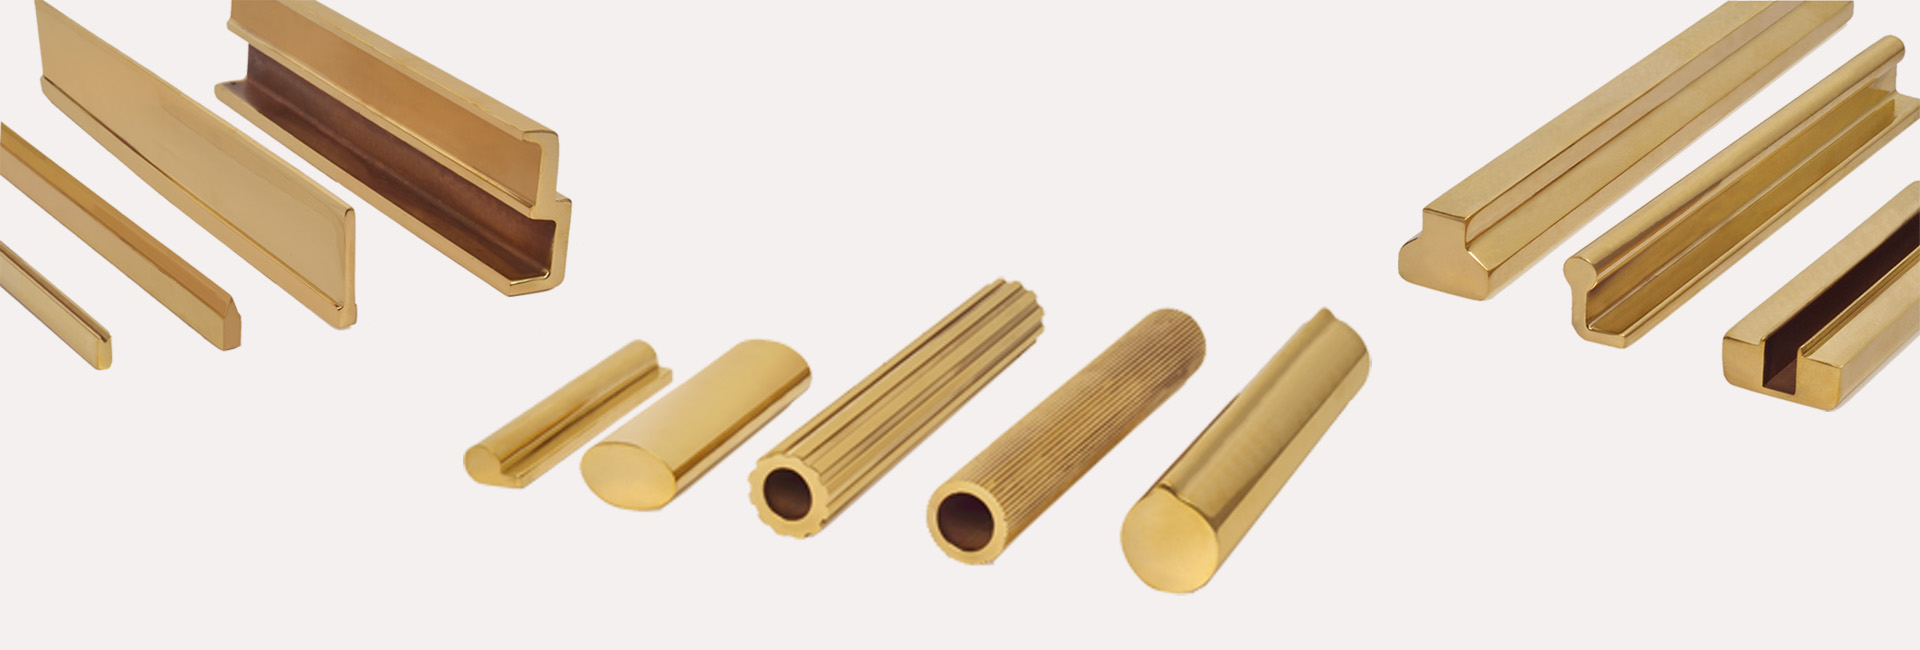 Golden Alloys Hard Strong Continuous Extrusion Polished Round Brass Rods  For Industrial Use at Best Price in Noida